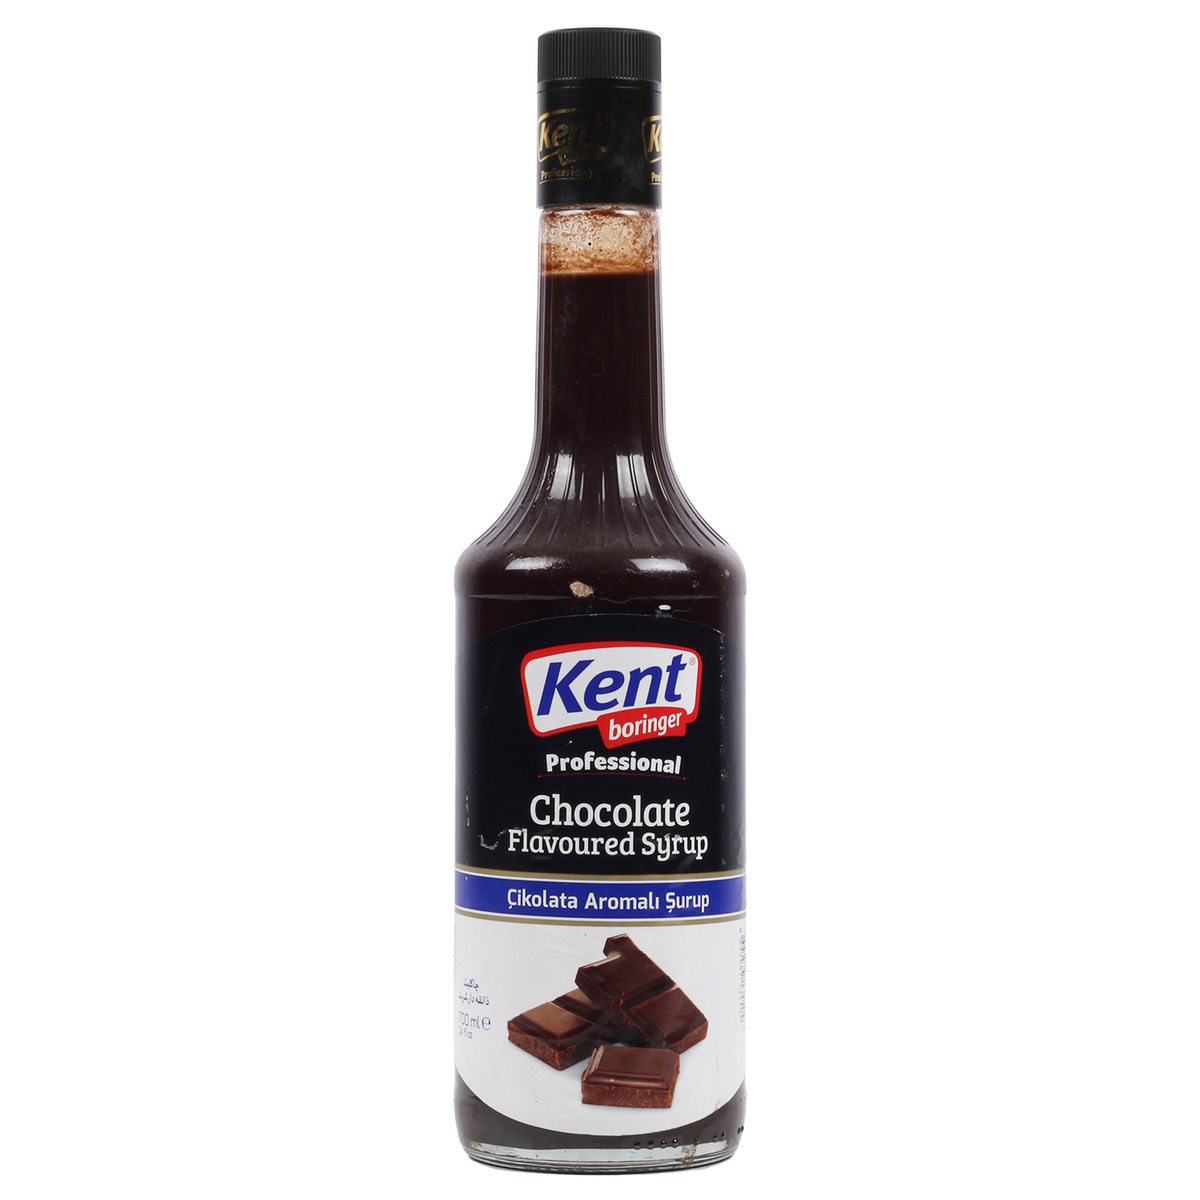 Kent Boringer Chocolate Flavoured Syrup 700ml